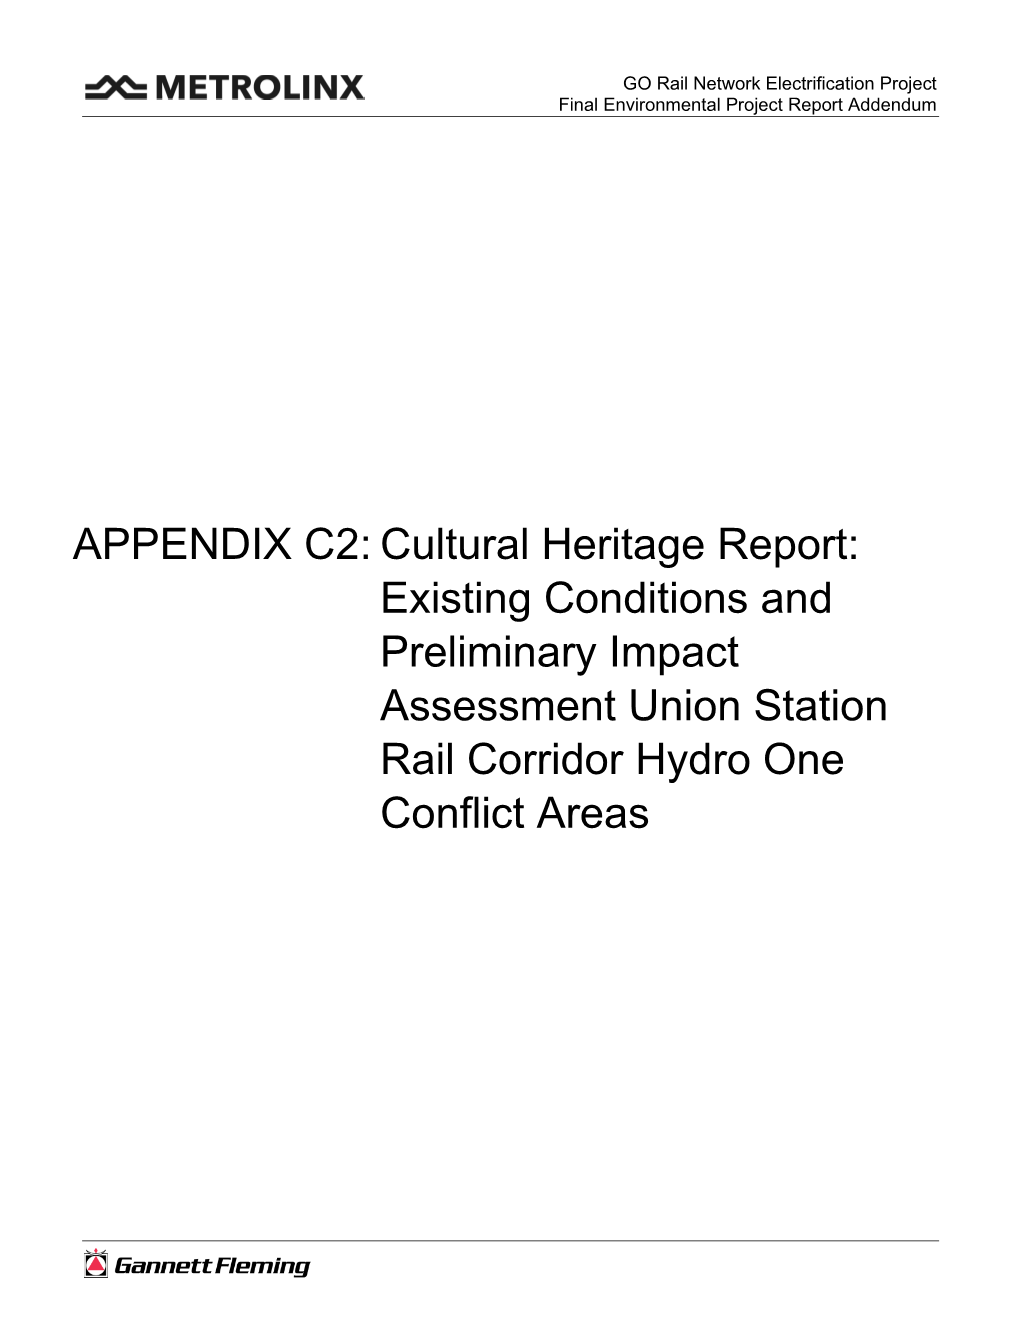 Cultural Heritage Report: Existing Conditions and Preliminary Impact Assessment Union Station Rail Corridor Hydro One Conflict Areas